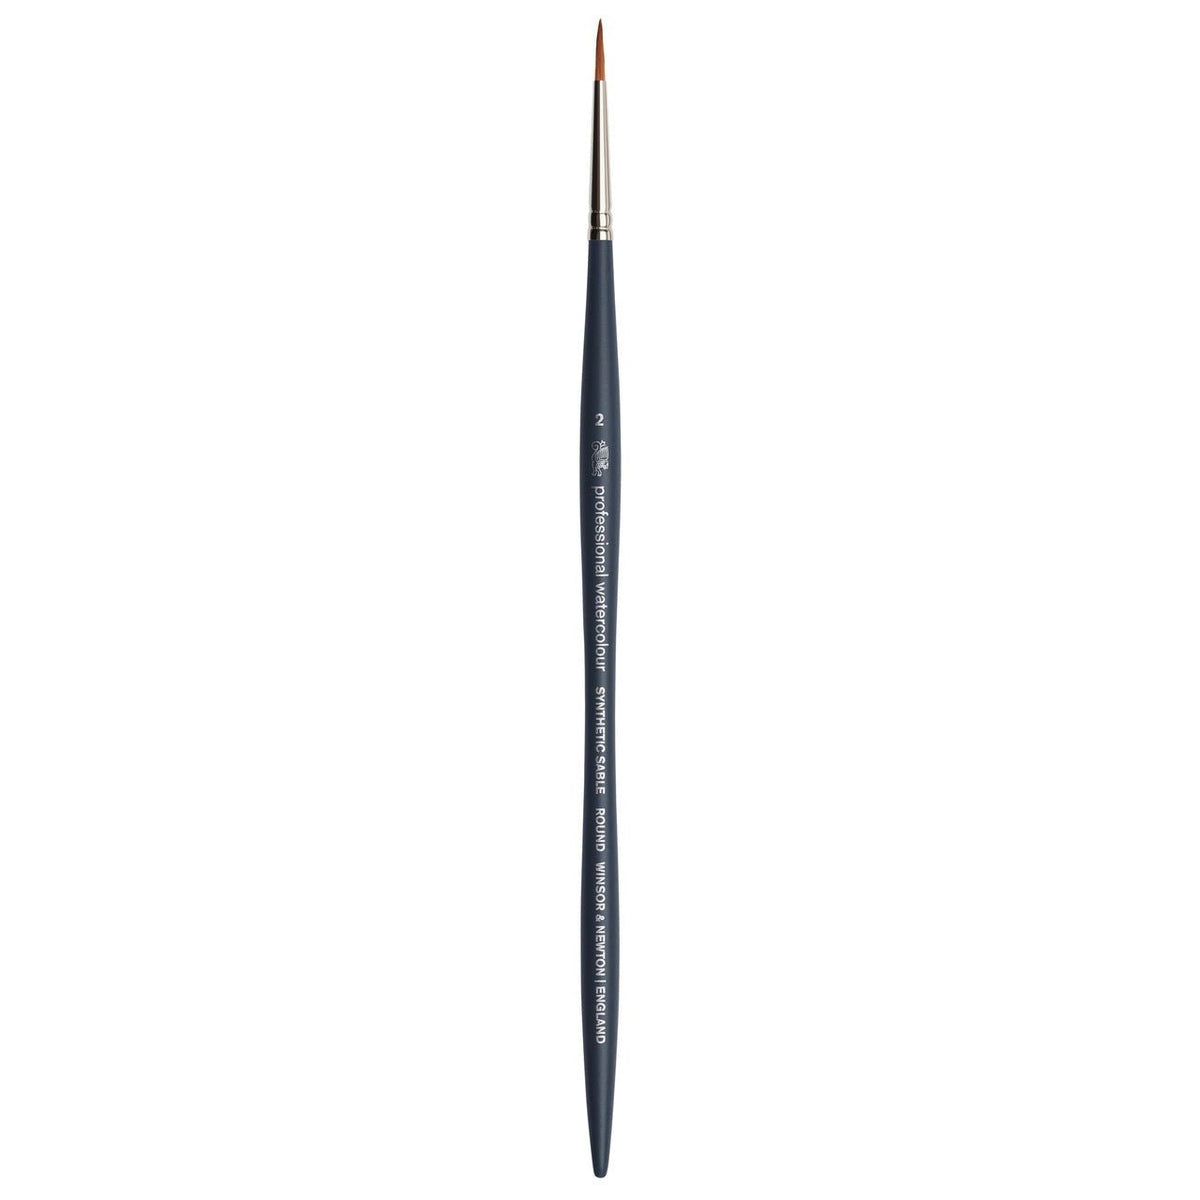 Winsor & Newton Professional Watercolor Synthetic Sable Brush - Round 2 - merriartist.com